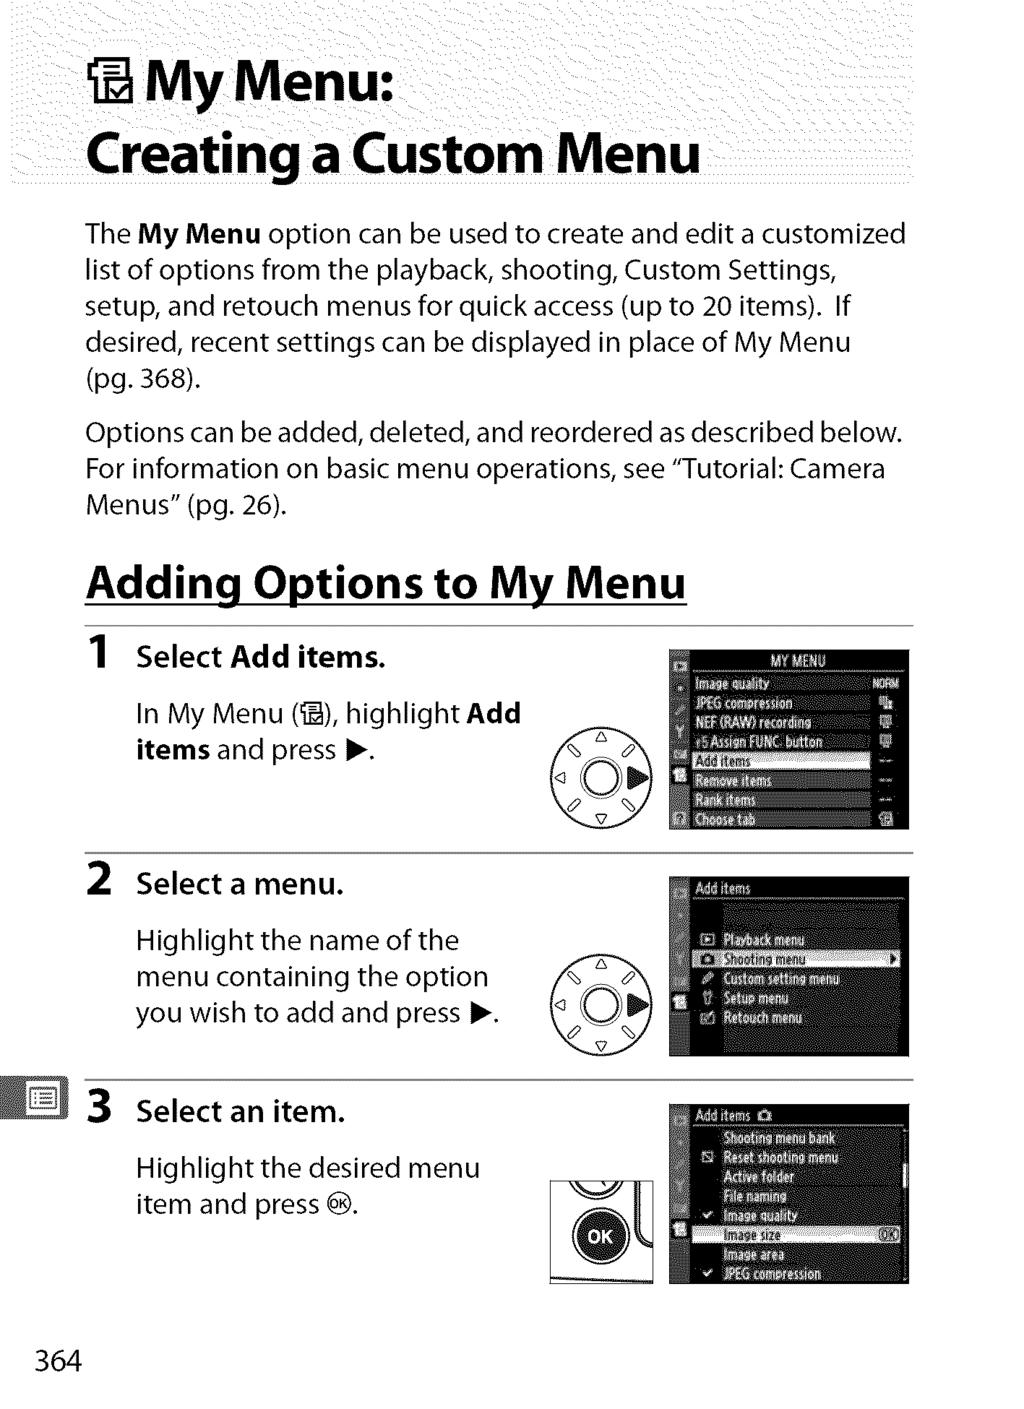 The My Menu option can be used to create and edit a customized list of options from the playback, shooting, Custom Settings, setup, and retouch menus for quick access (up to 20 items).